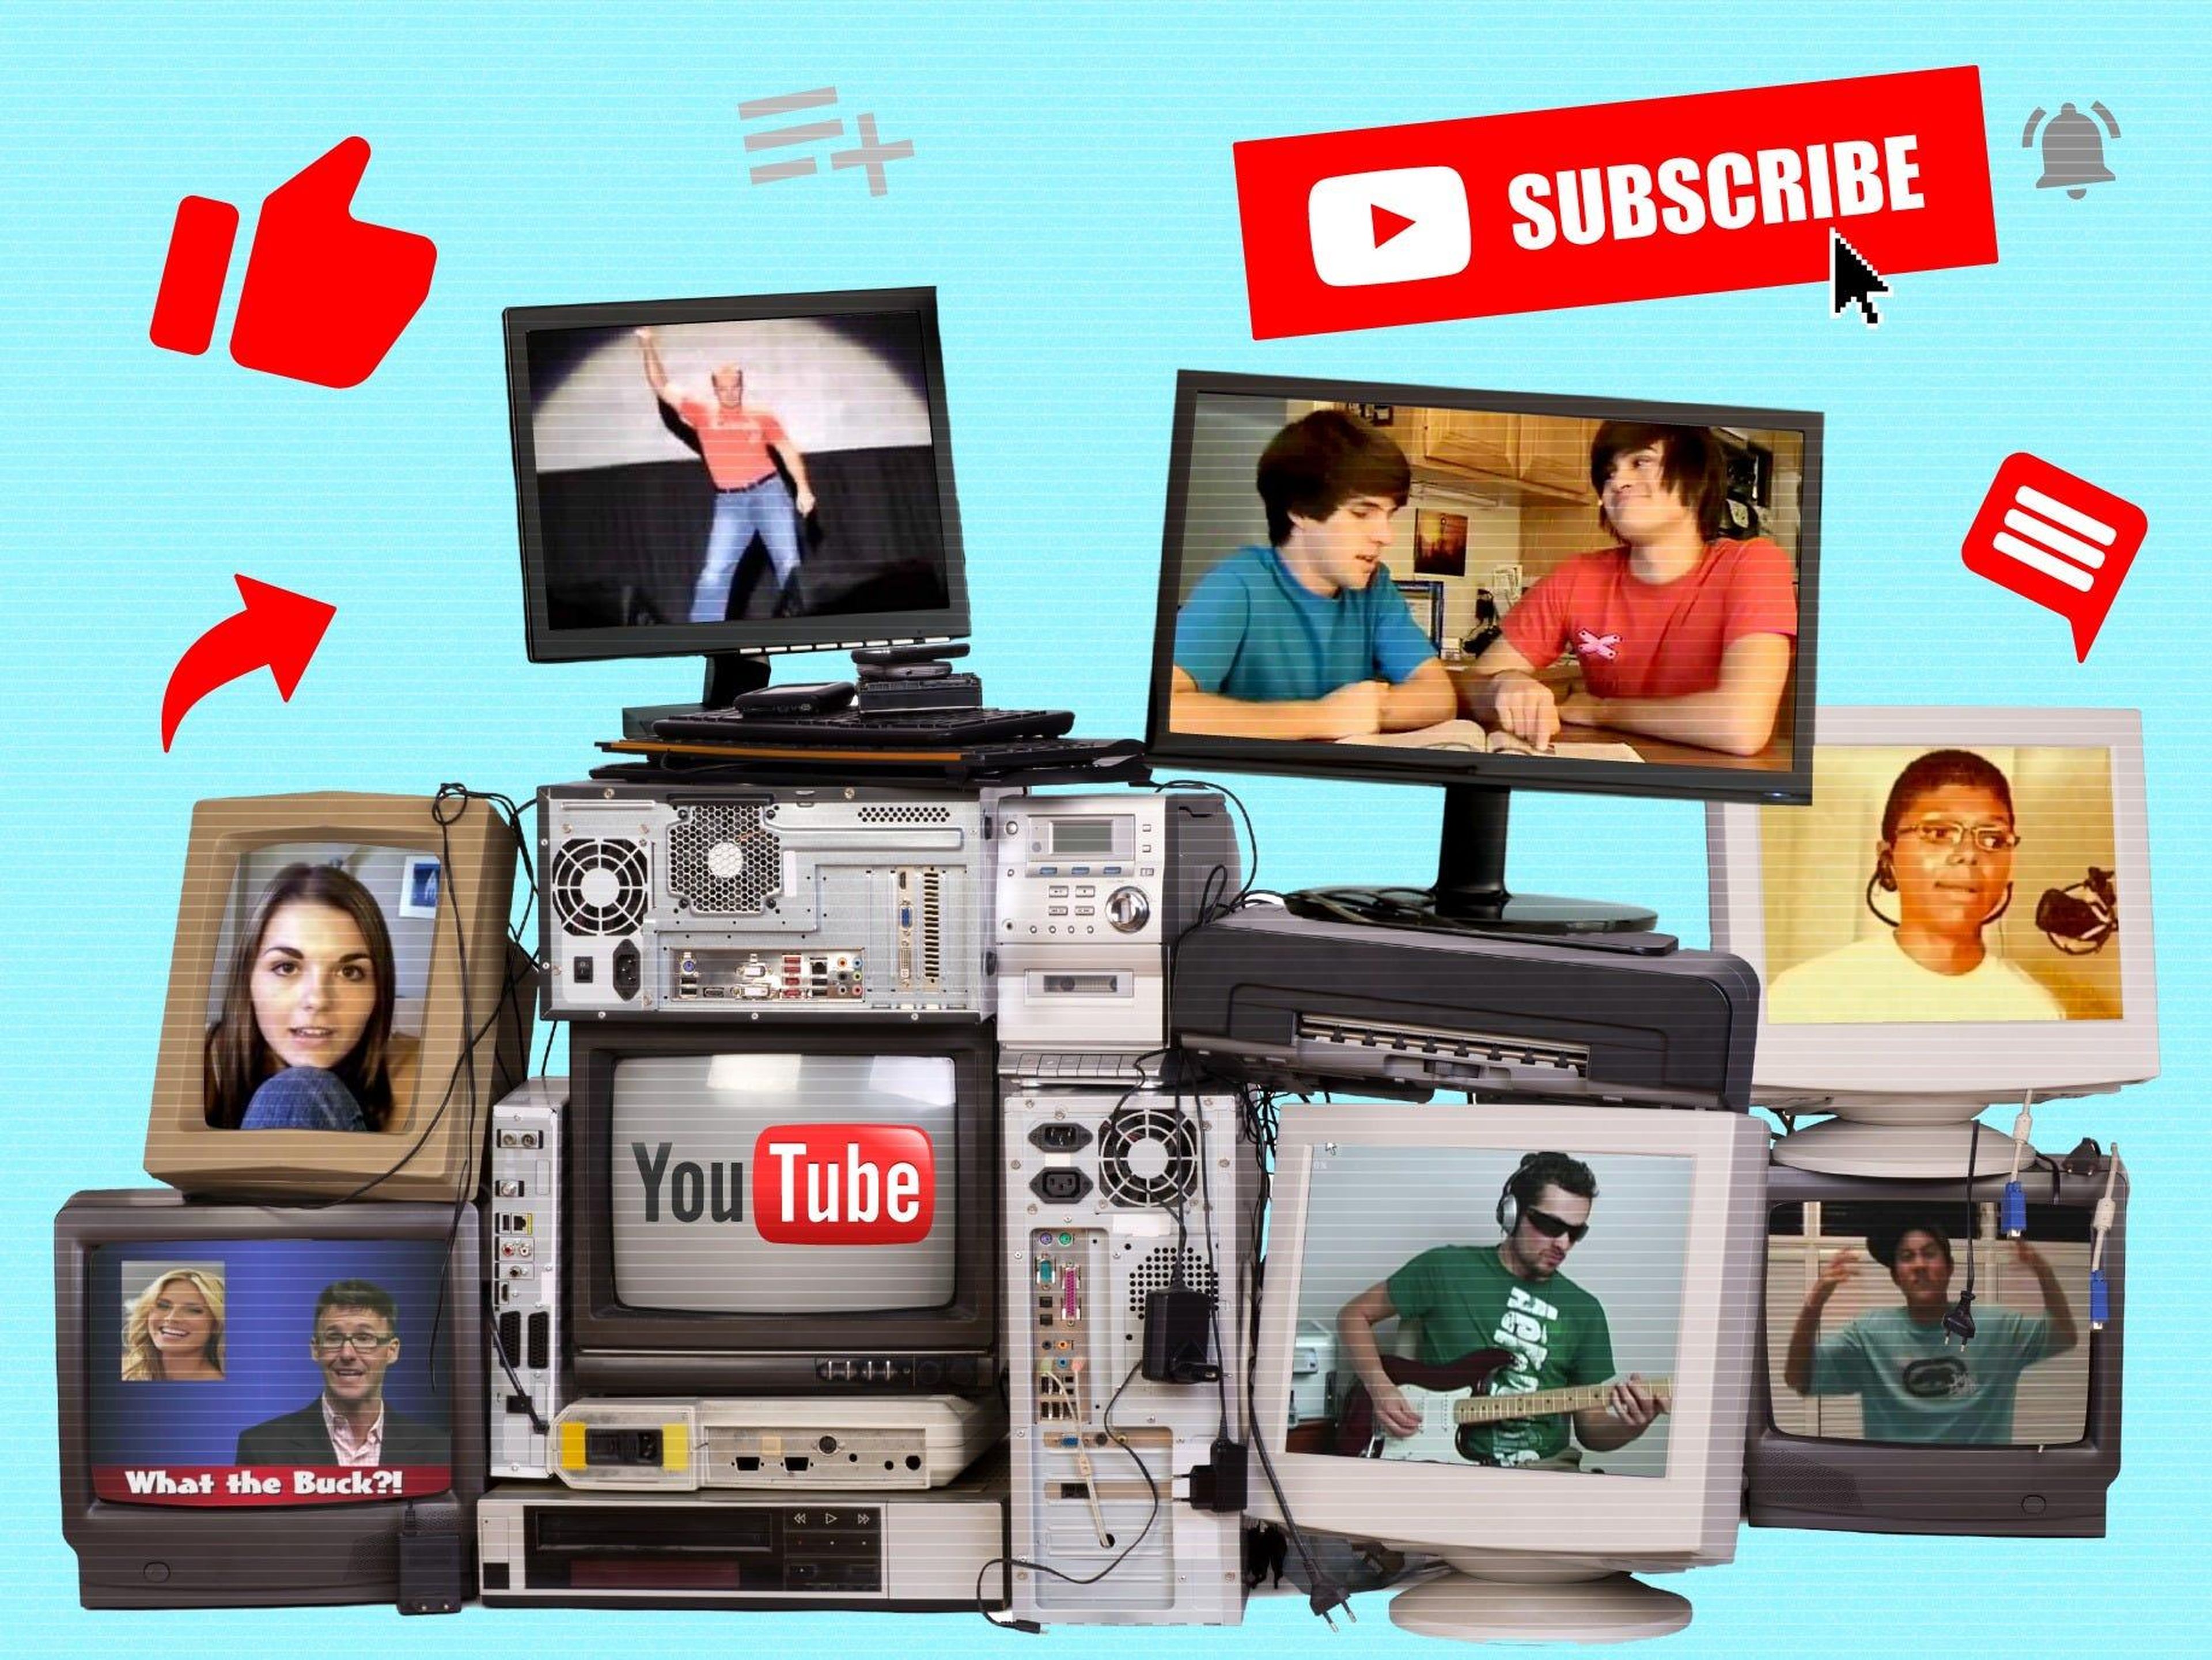 Some of YouTube's earliest creators, who helped shape the platform into what it's become today.